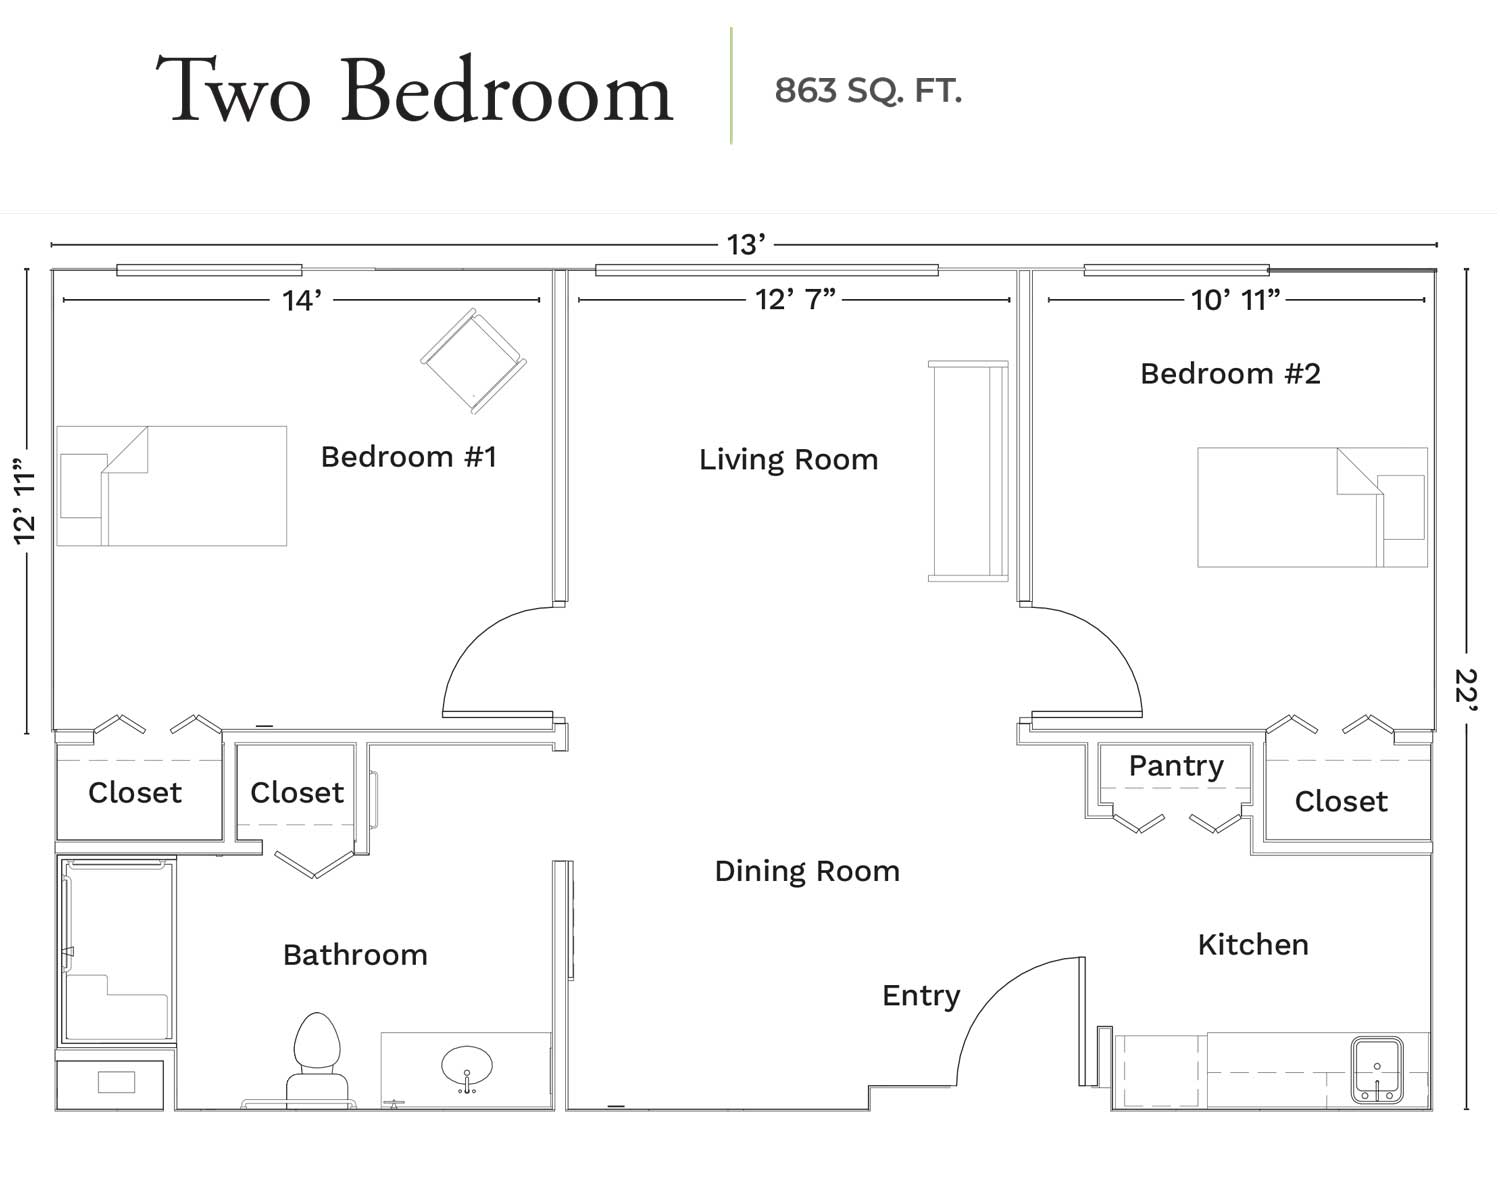 Two-bedroom apartment floor plan featuring living room, kitchen, dining room, and bathroom.